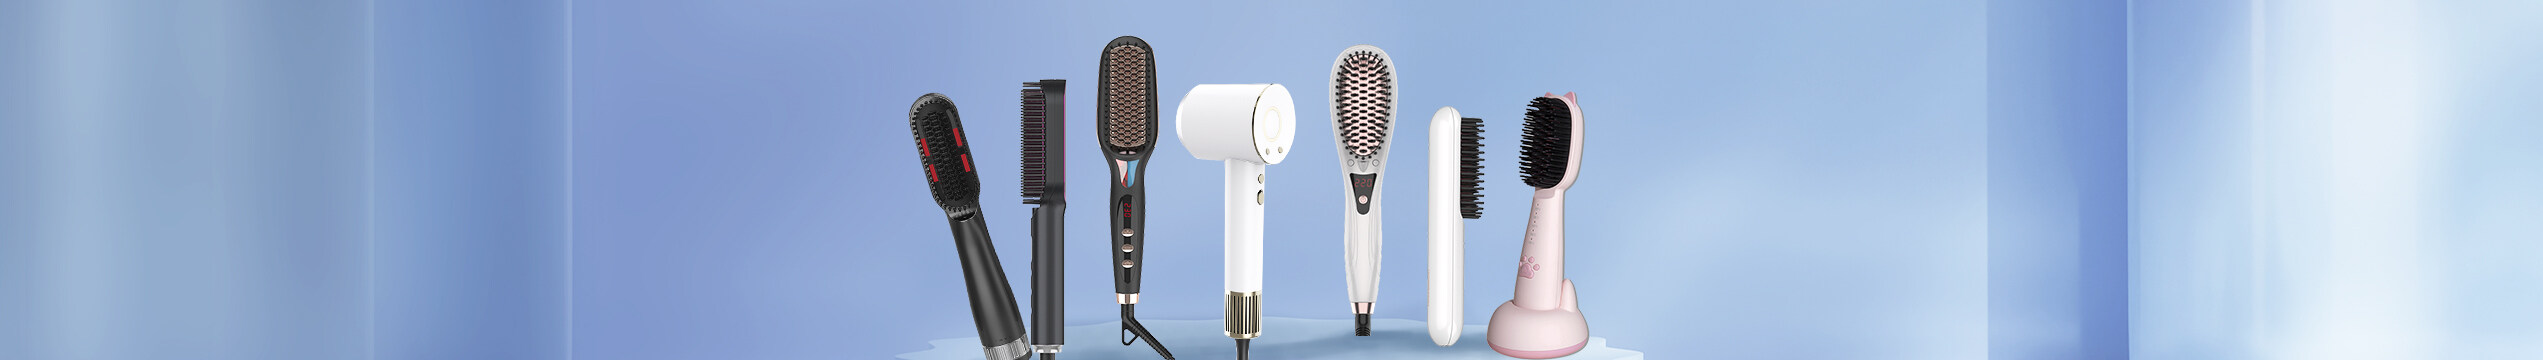 Blow-Dryer Straightening Brushes and Hot Air Brushes: Harmful to Your Hair?